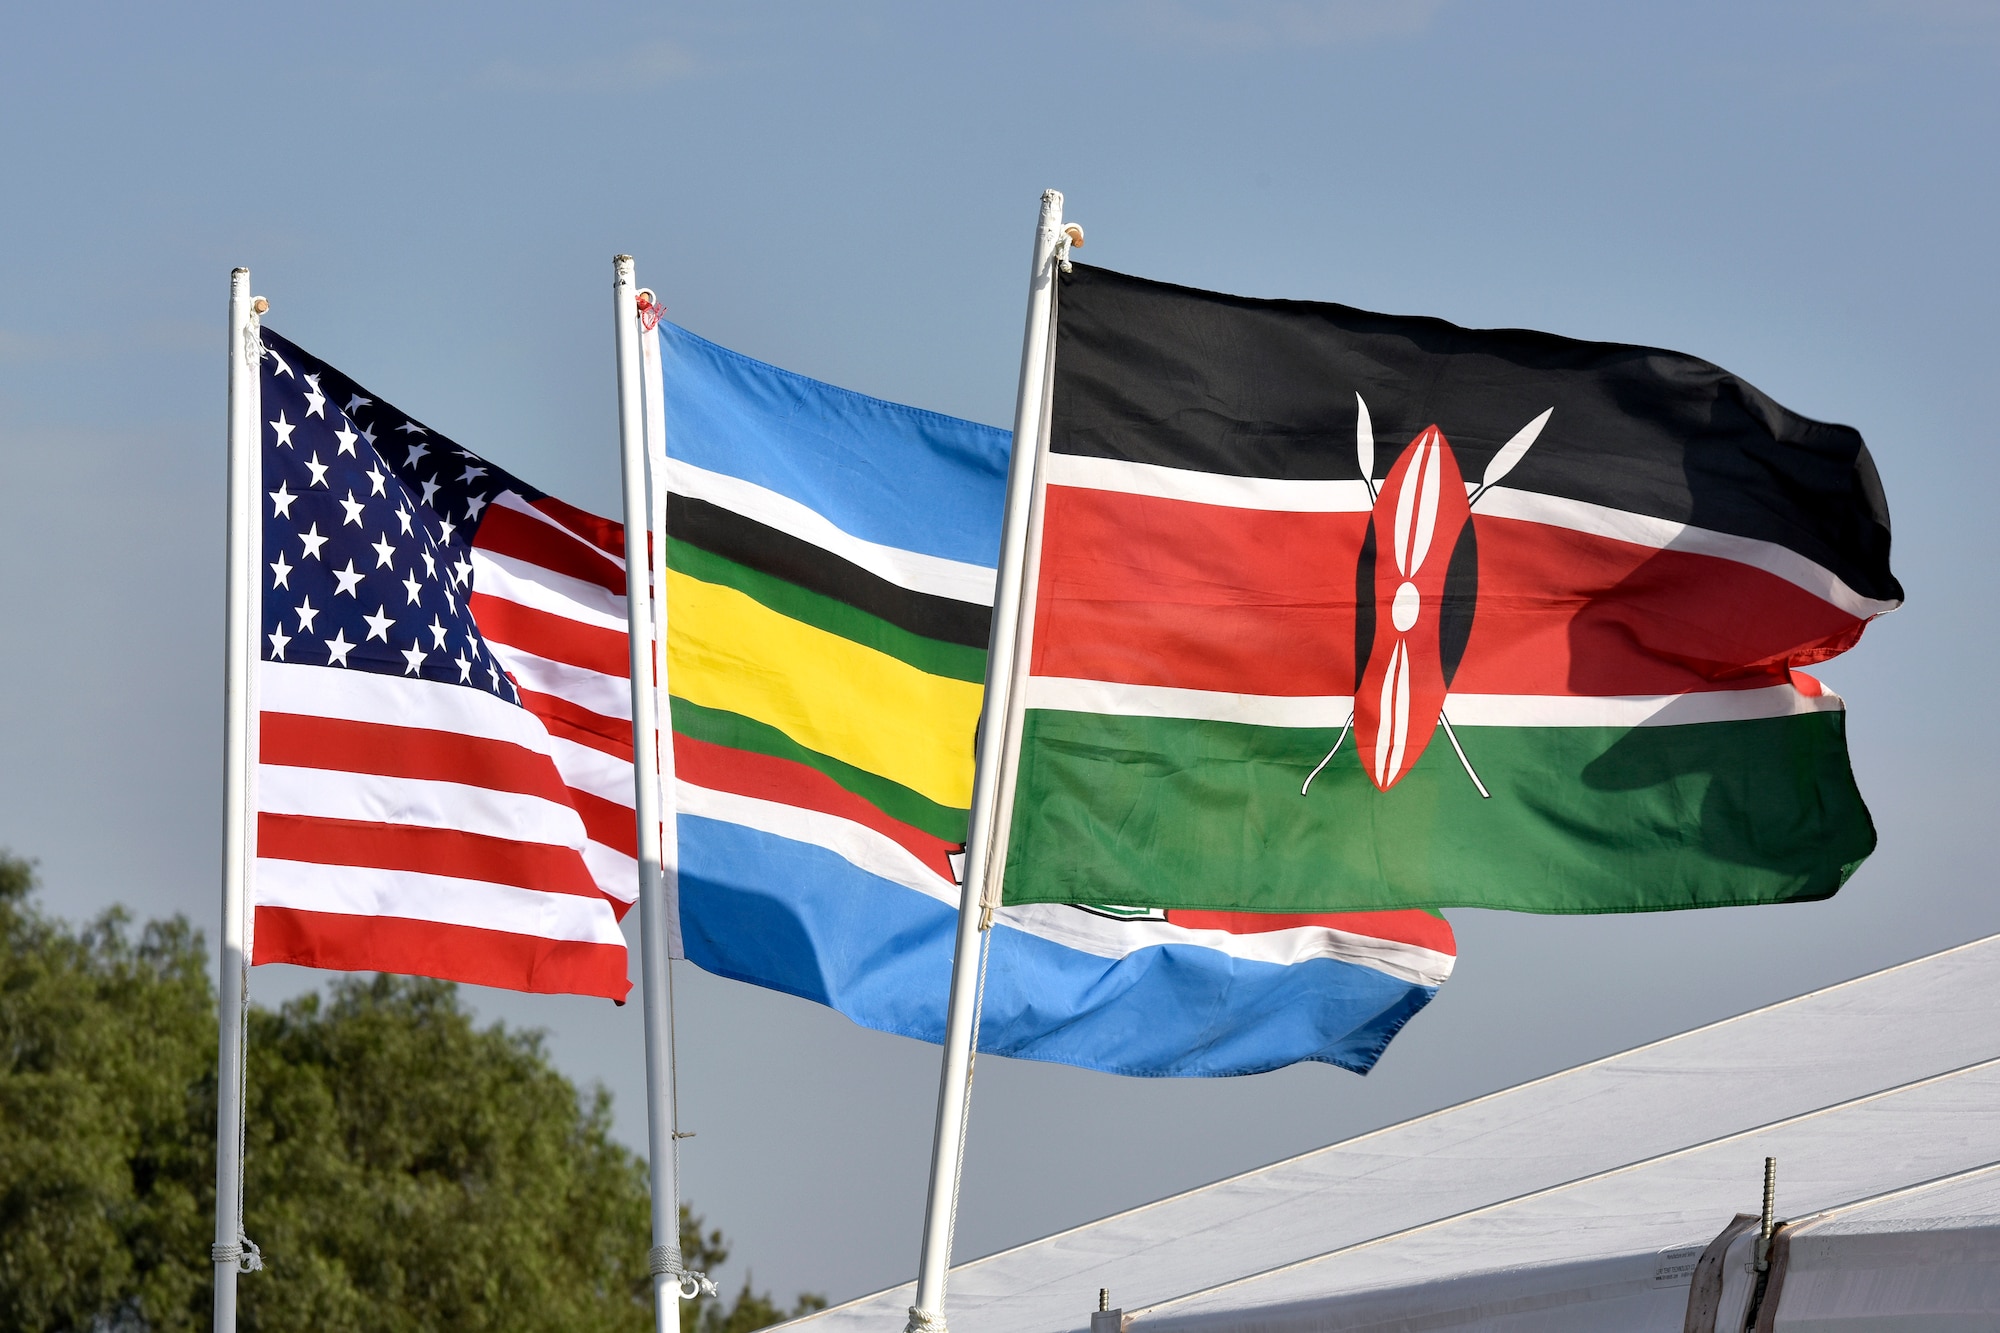 Flags from the U.S., African community, and Kenya are posted for the African Partnership Flight Kenya 2019 at Laikipia Air Base, Kenya, August 20, 2019.